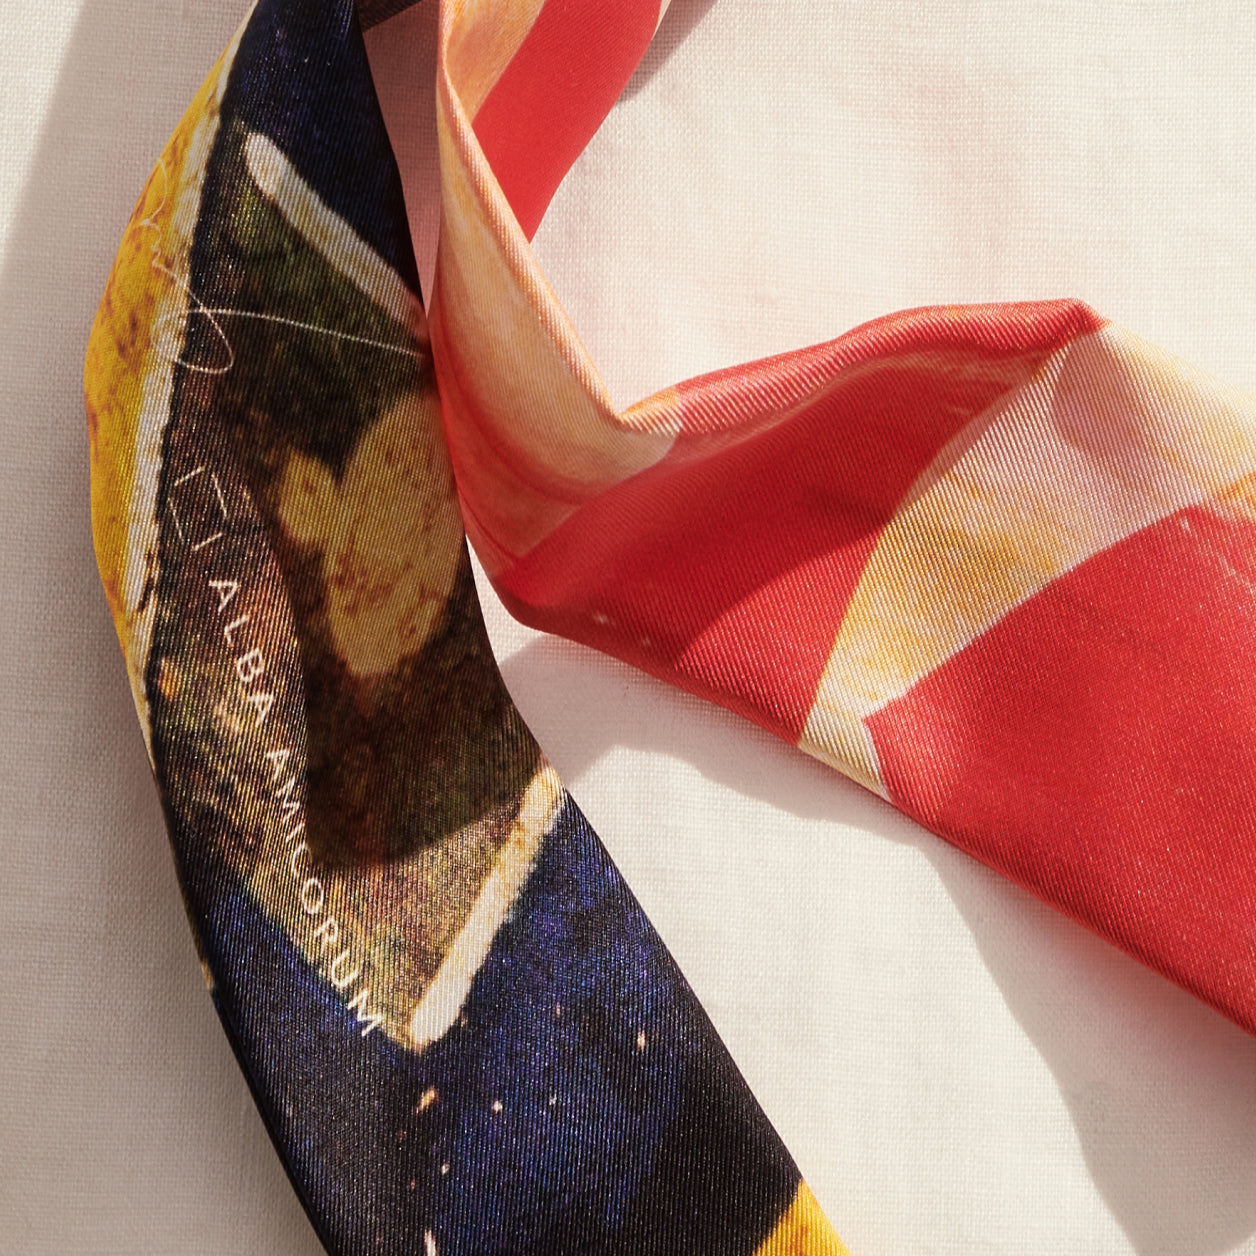 A romantic yet edgy vibe of the 90s Soho, NYC by James T Murray in this silk twilly scarf